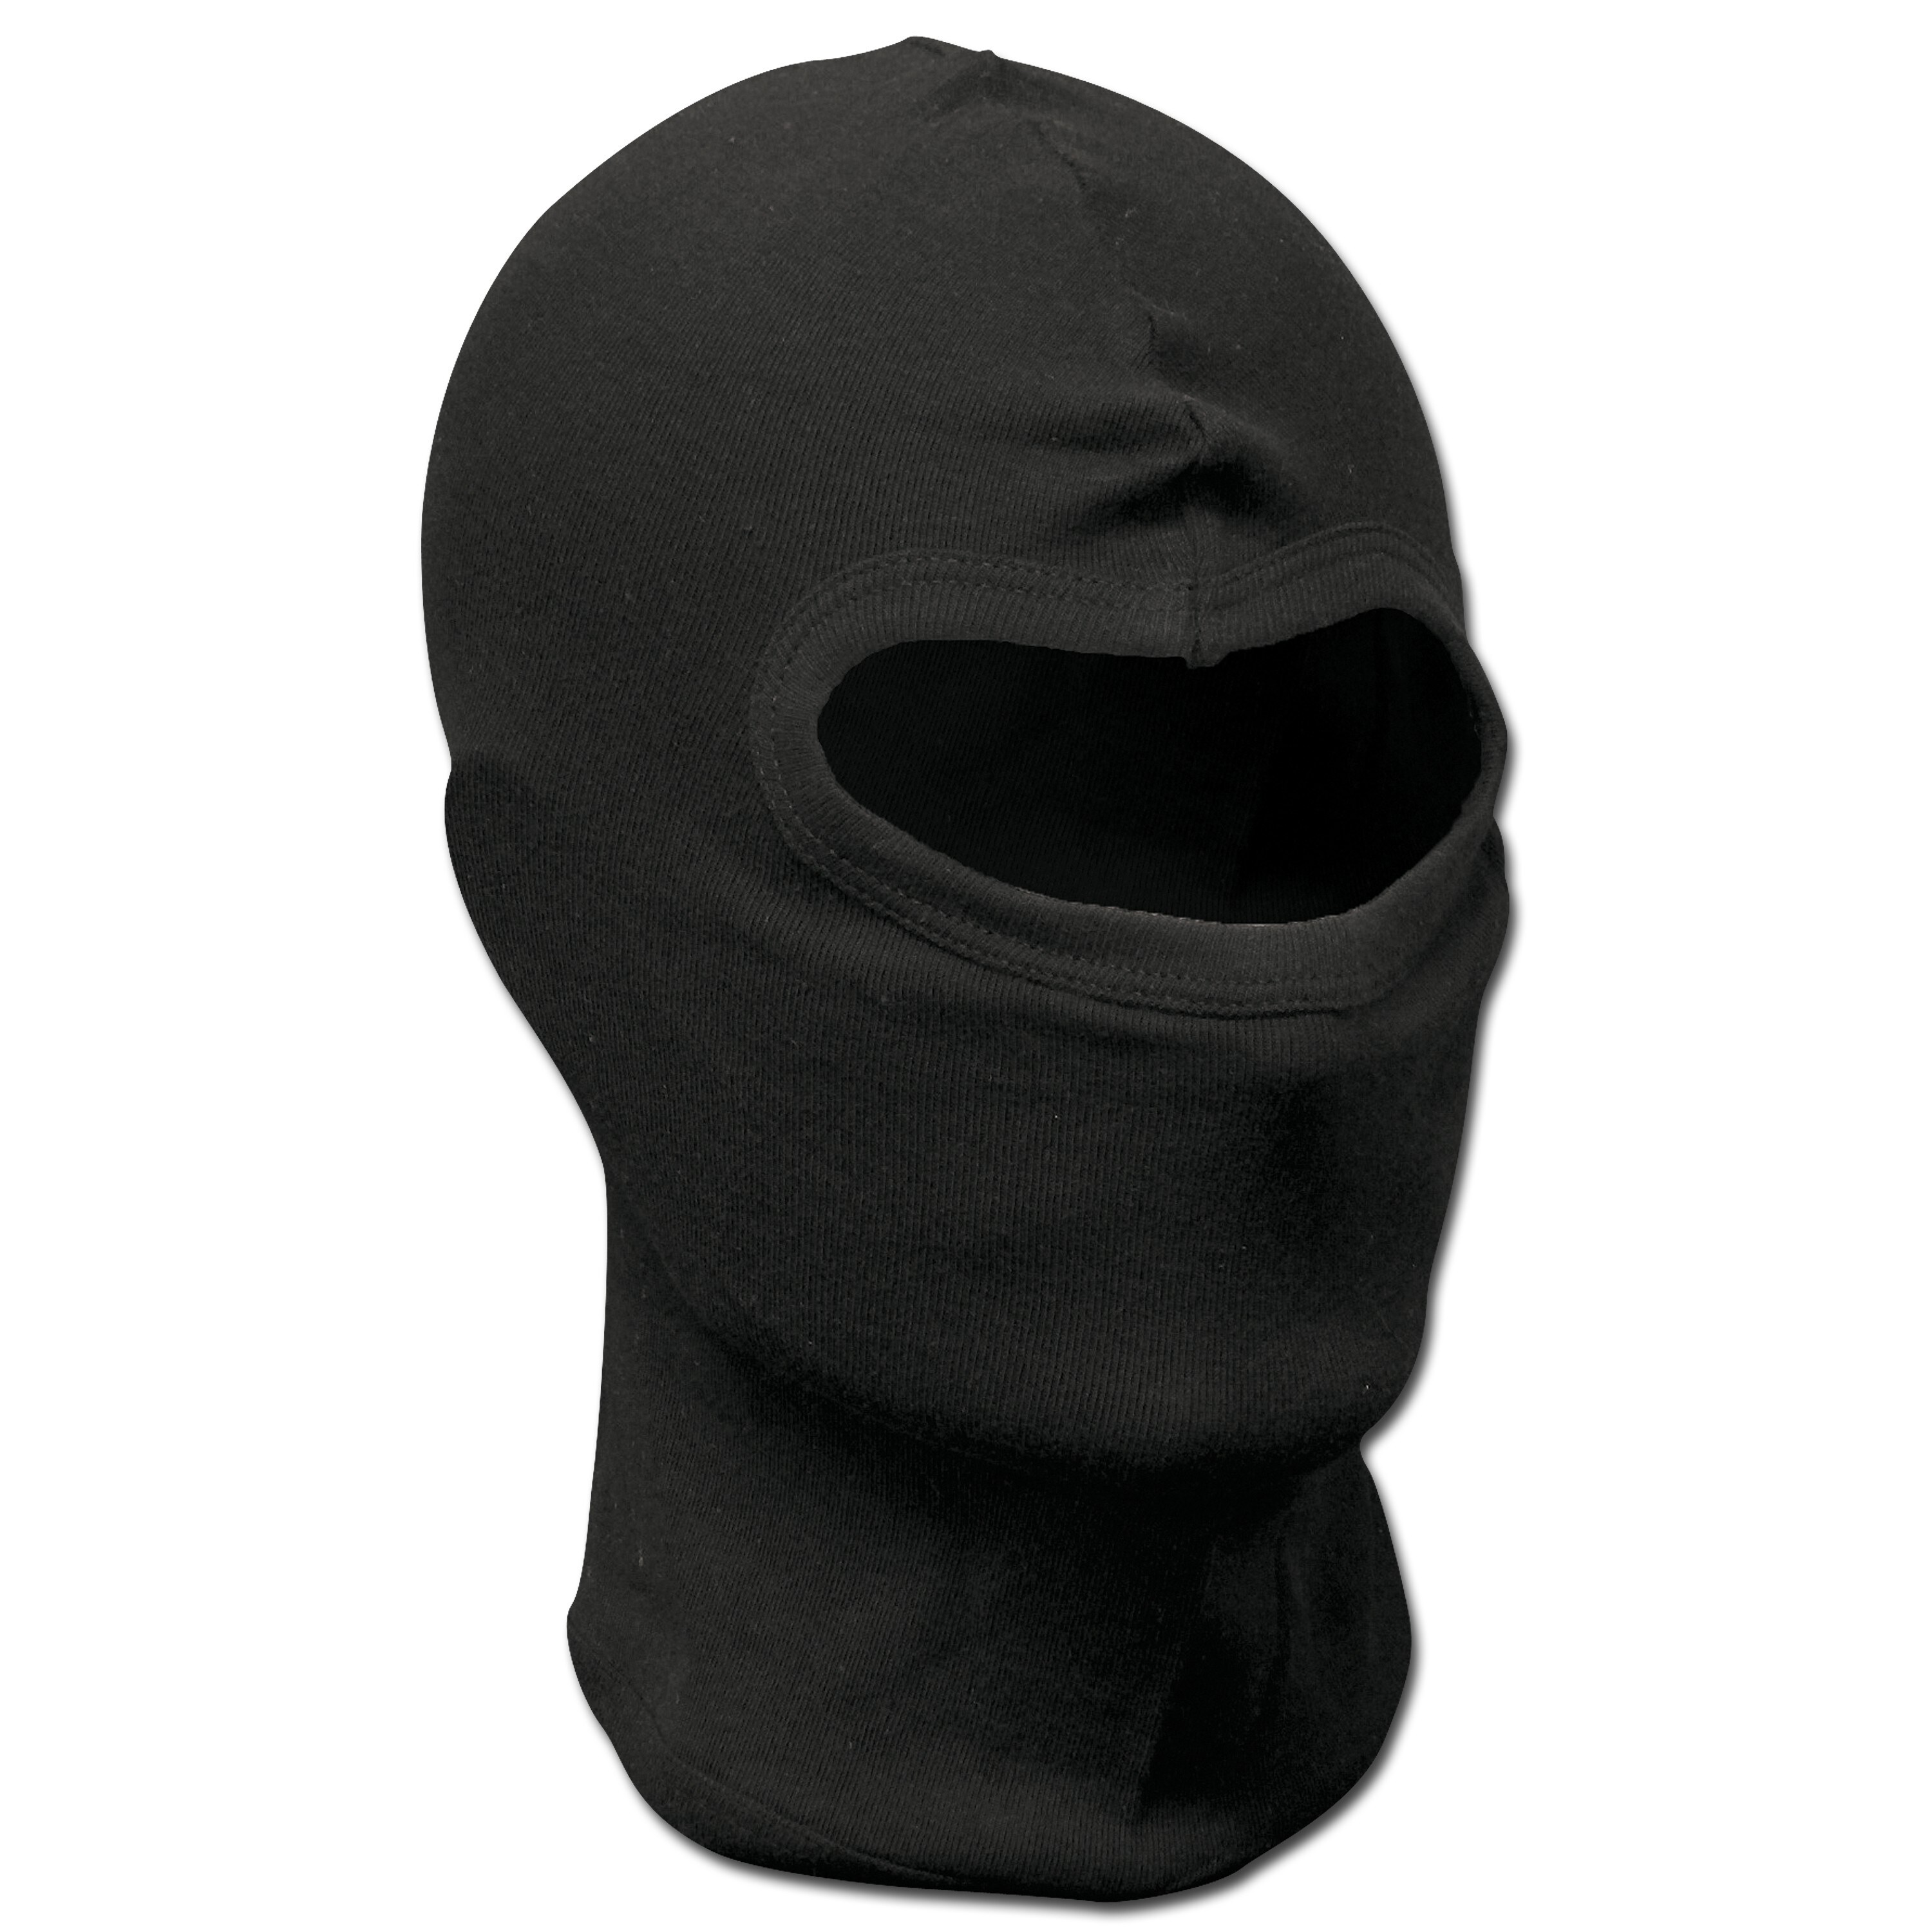 Purchase the Face Mask 1-Hole black by ASMC